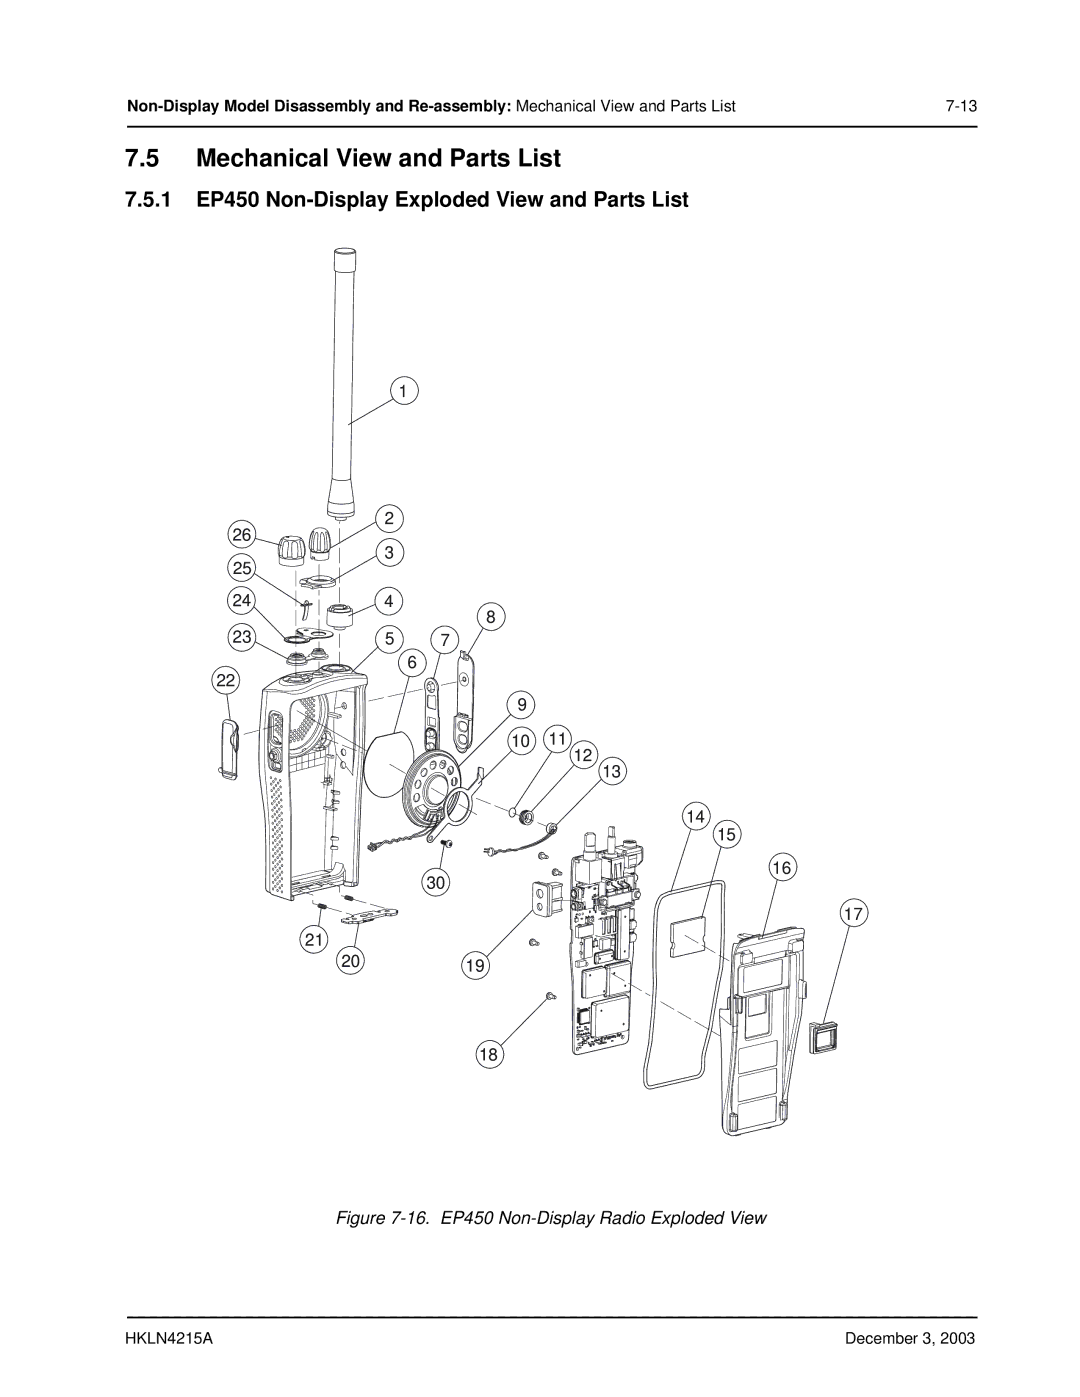 Motorola service manual 1 EP450 Non-Display Exploded View and Parts List, 16. EP450 Non-Display Radio Exploded View 